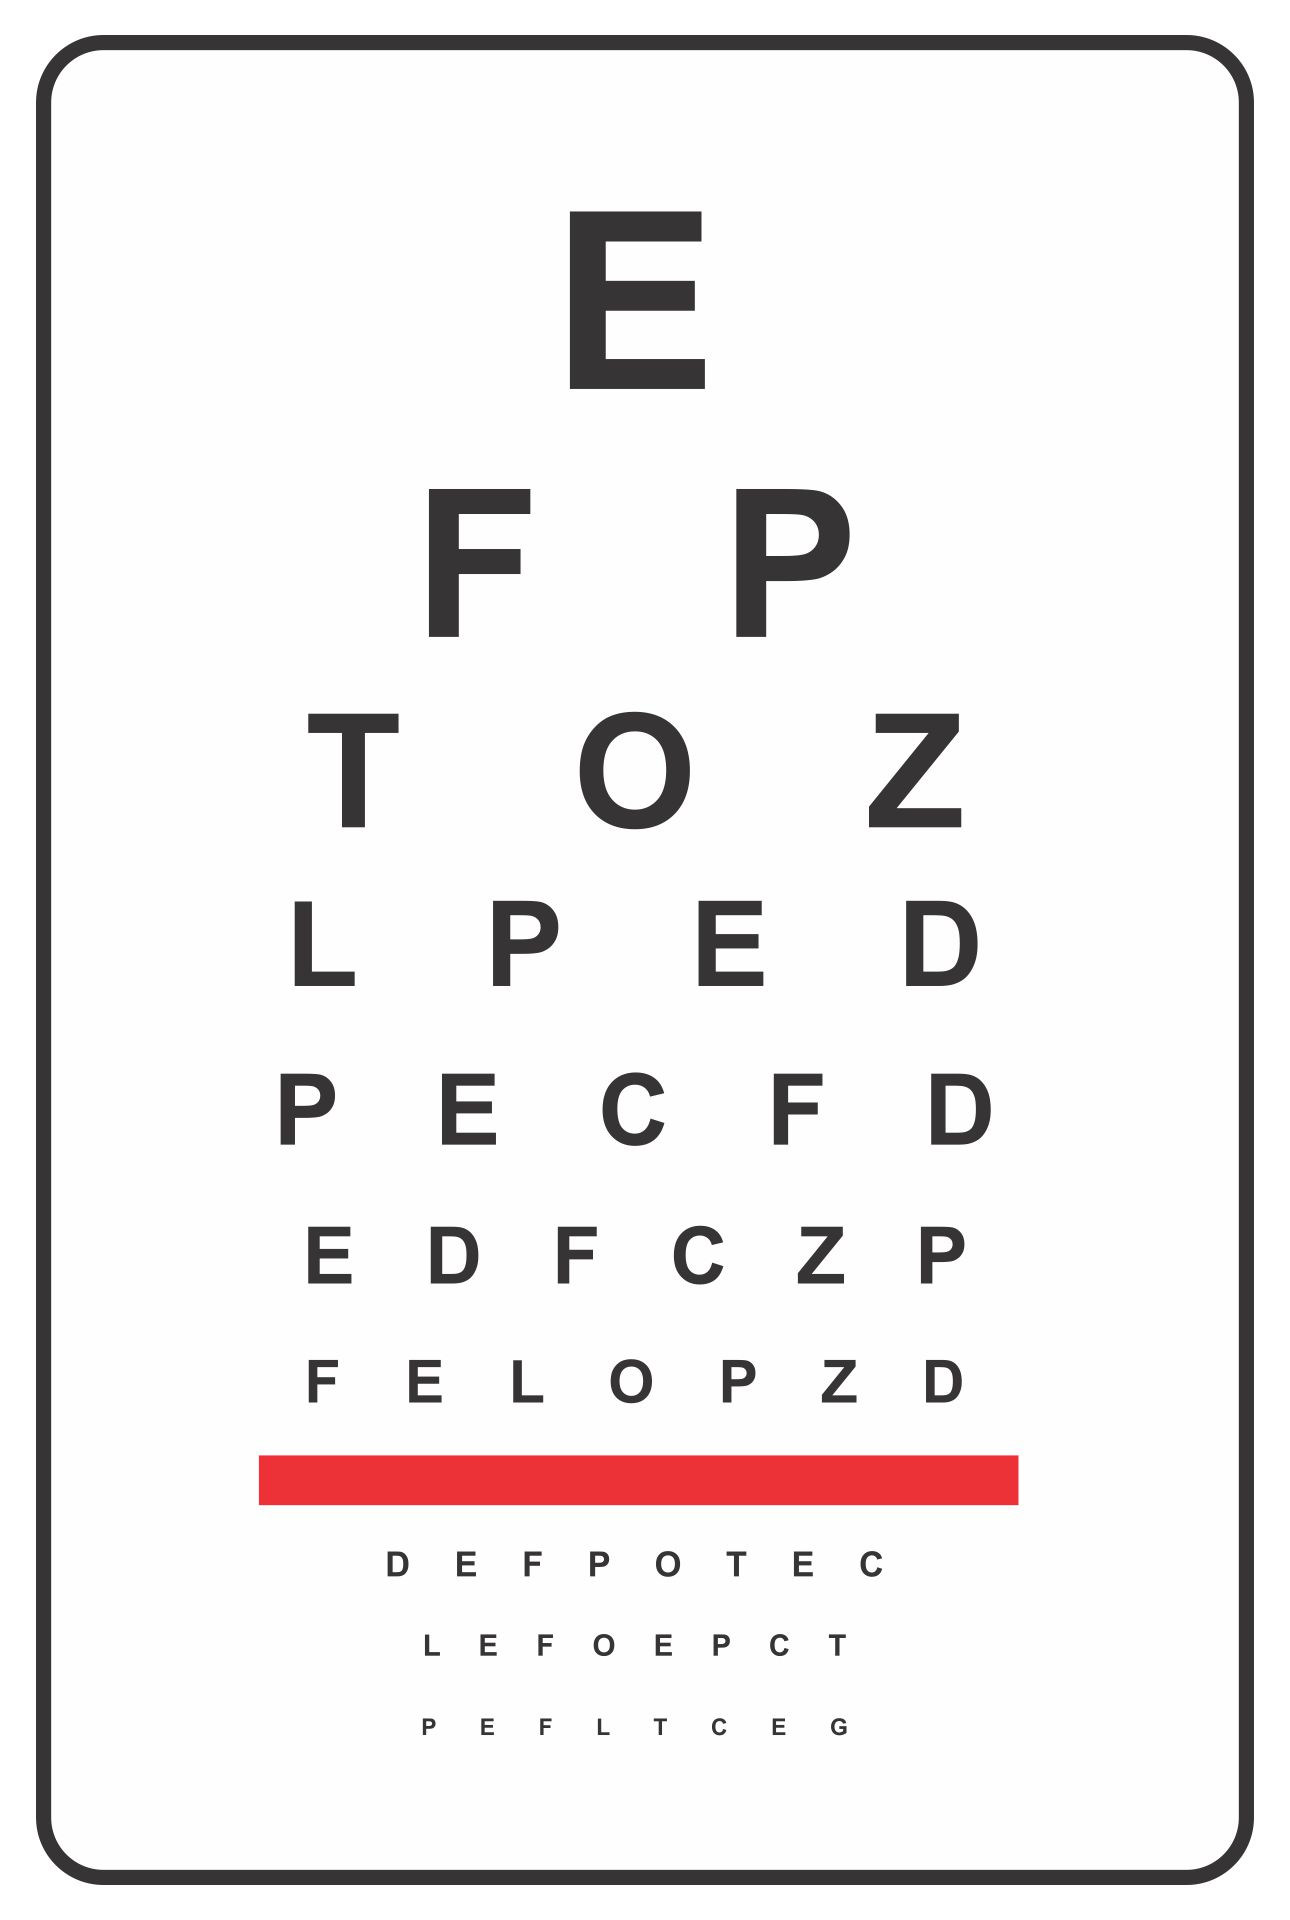 snellen-eye-chart-for-visual-acuity-and-color-vision-test-precision